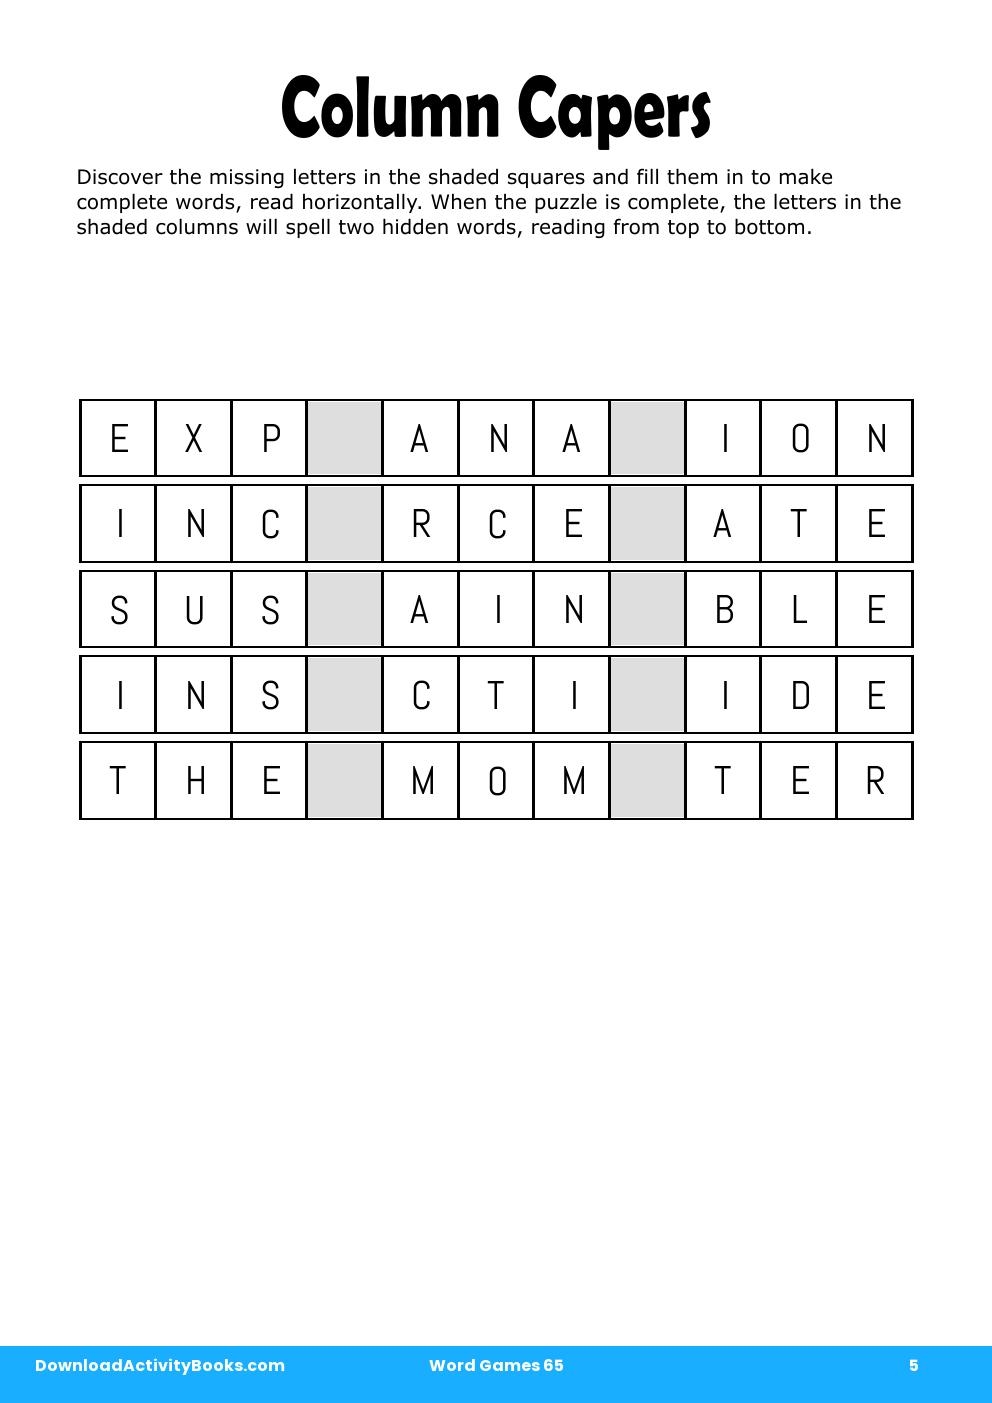 Column Capers in Word Games 65